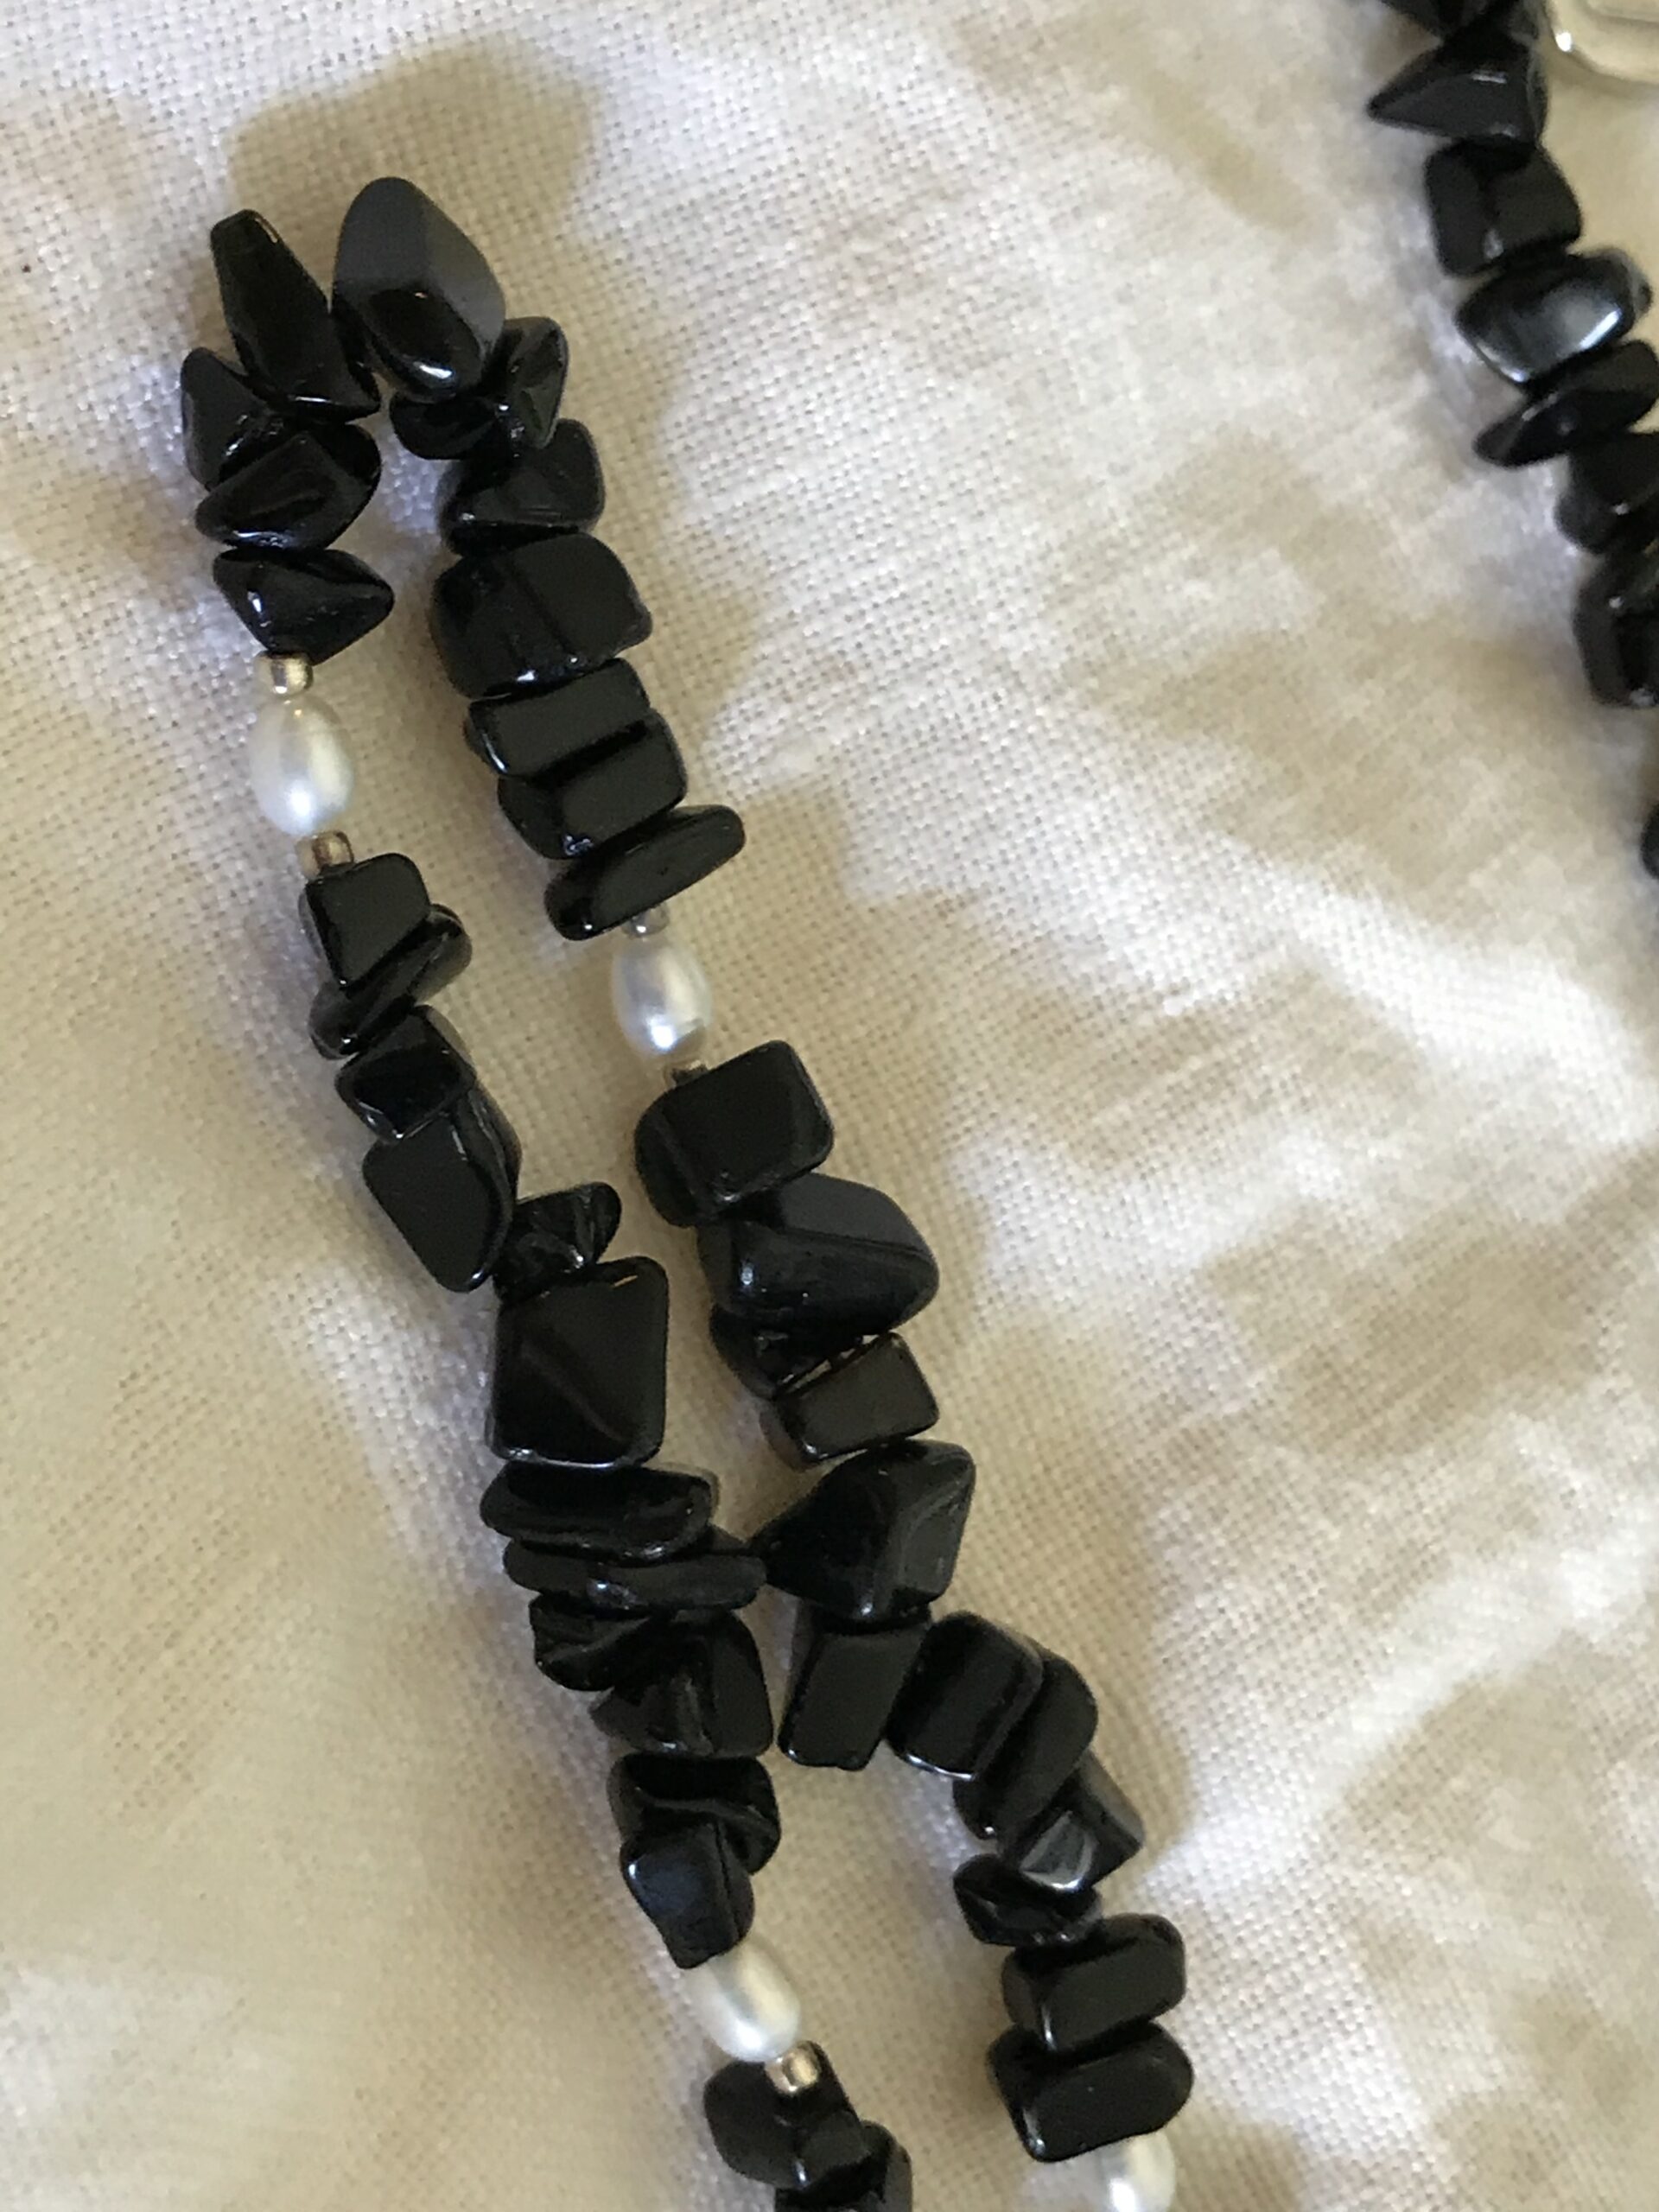 Clasp-less black and white “natural crystal bead” 21 inch necklace on silk thread